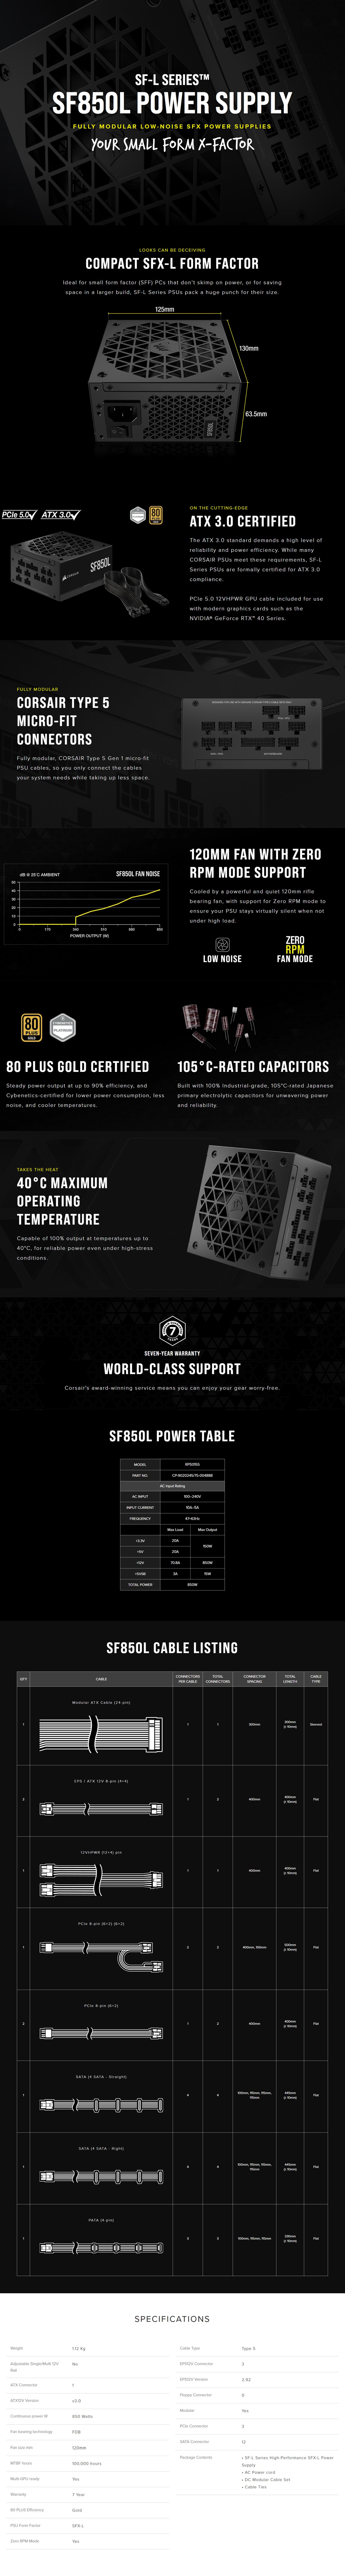 A large marketing image providing additional information about the product Corsair SF850L 850W Gold SFX-L Modular PSU - Additional alt info not provided